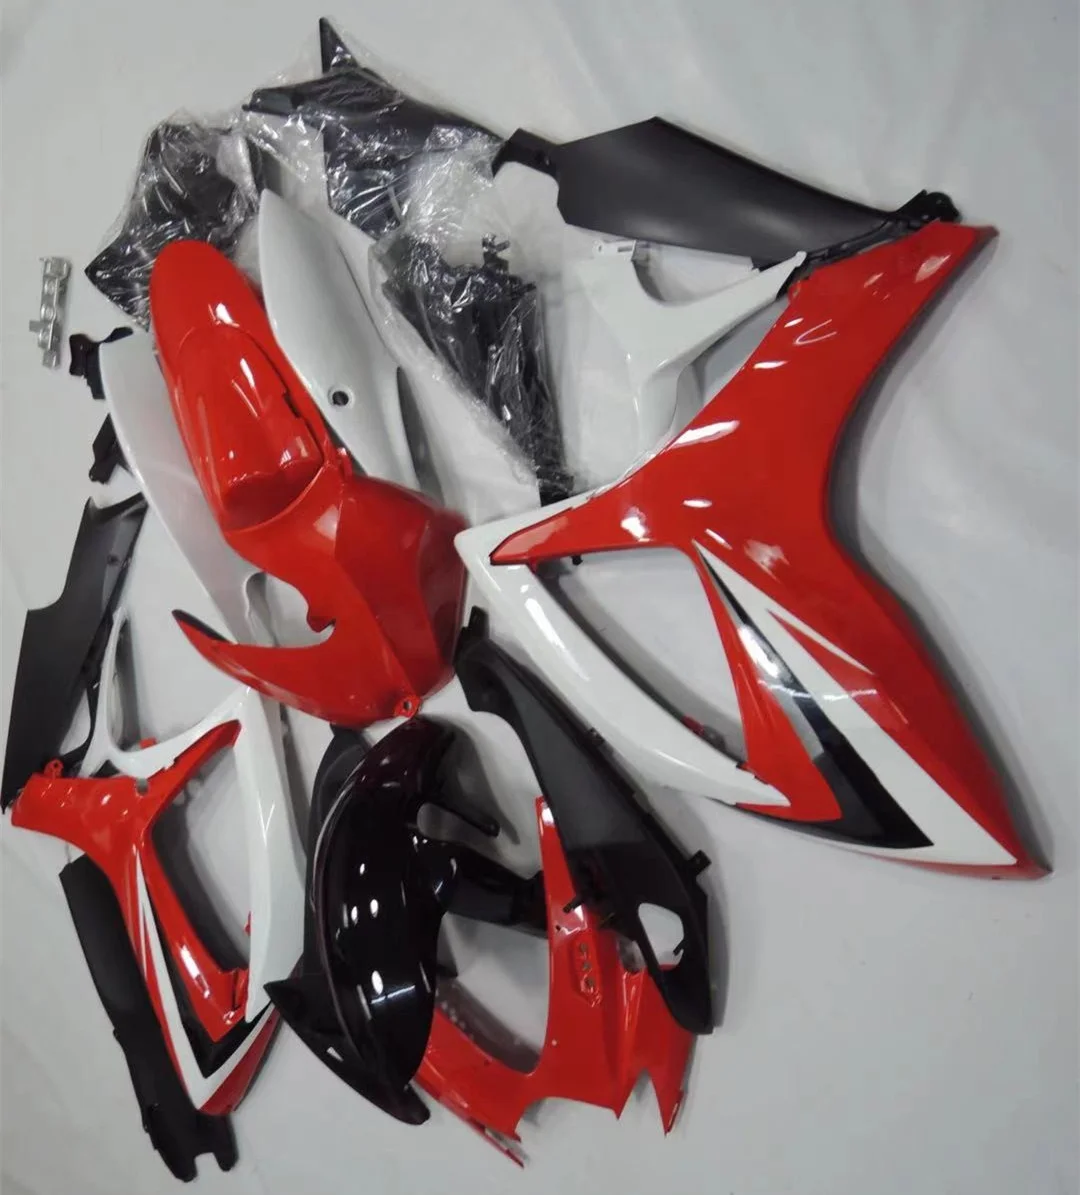 

2022 WHSC Motorcycle Fairing Fit For SUZUKI GSXR600-750 2006-2007, Pictures shown